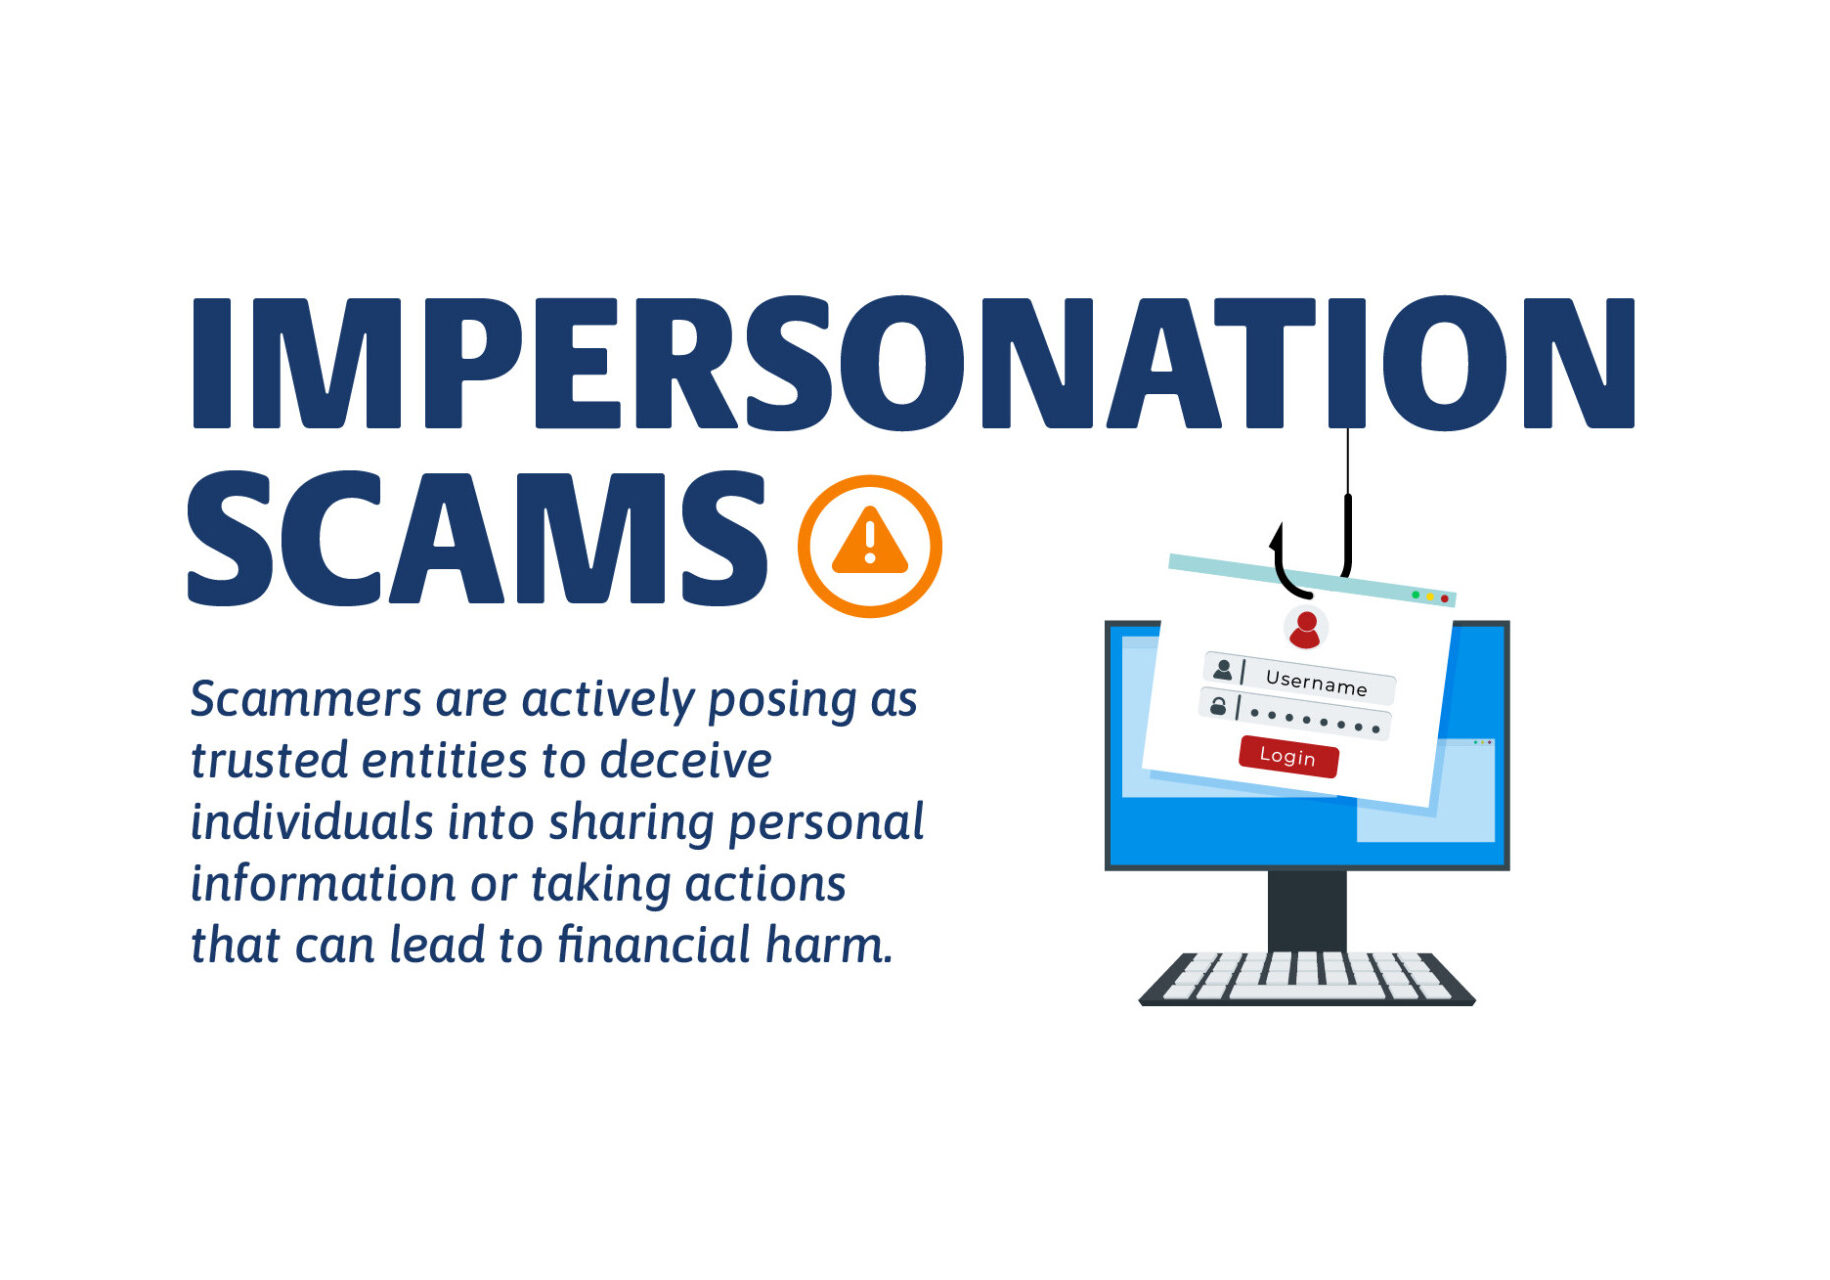 Impersonation Scams: Scammers are actively posing as trusted entities to deceive individuals into sharing personal information or taking actions that can lead to financial harm.